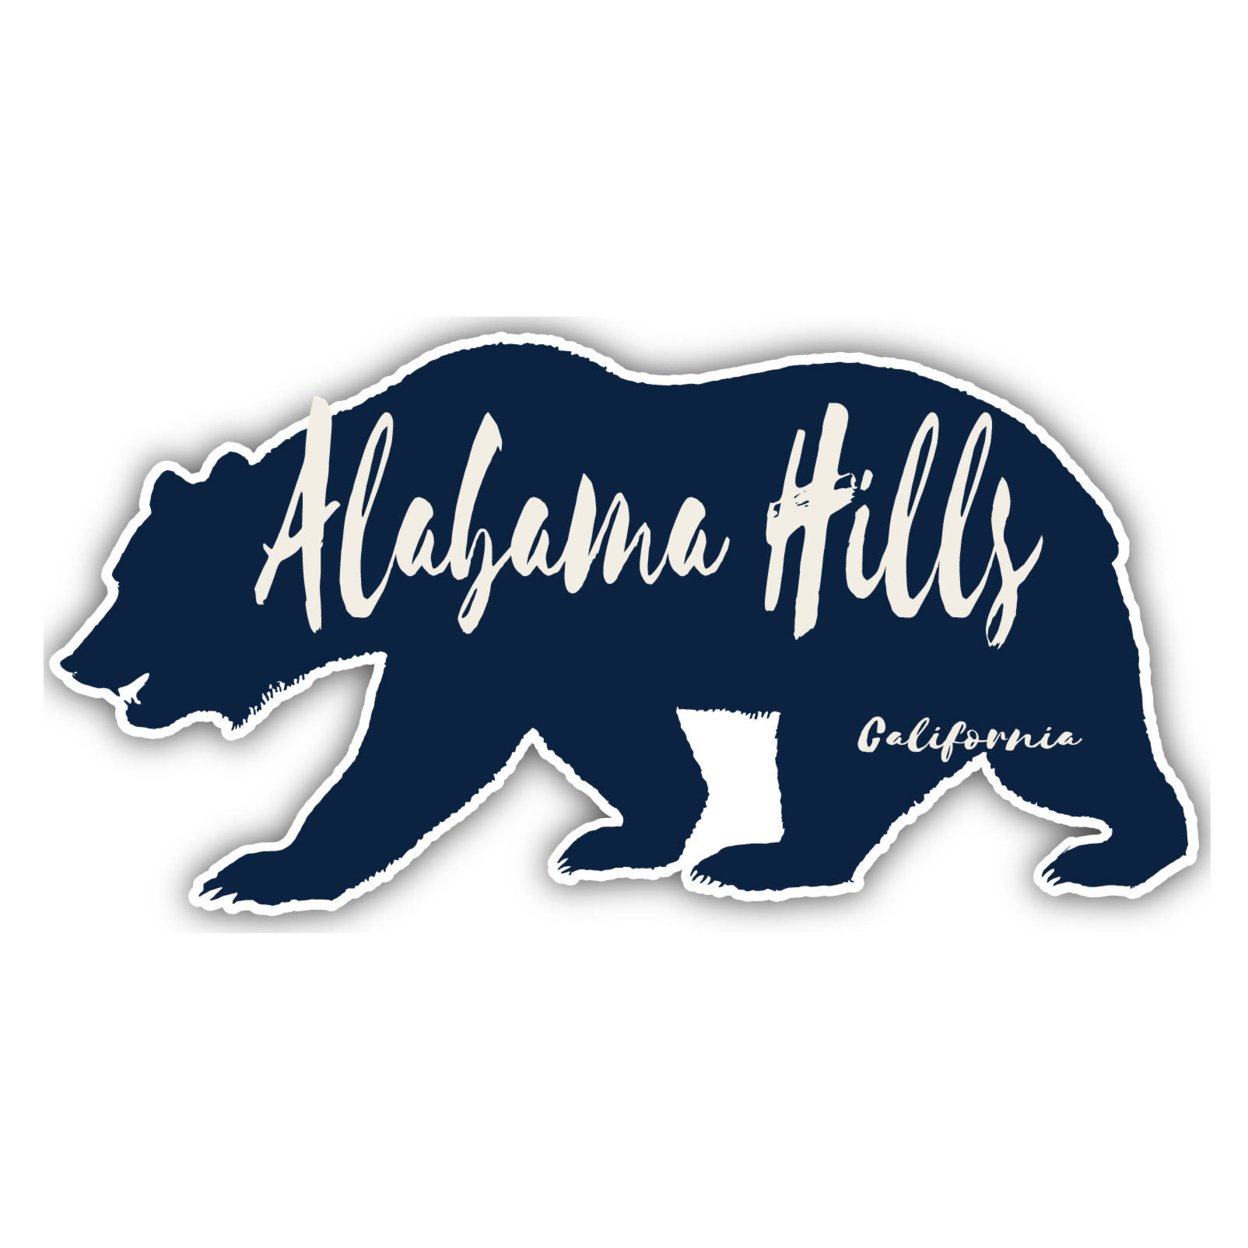 Alabama Hills California Souvenir Decorative Stickers (Choose Theme And Size) - 4-Pack, 10-Inch, Great Outdoors